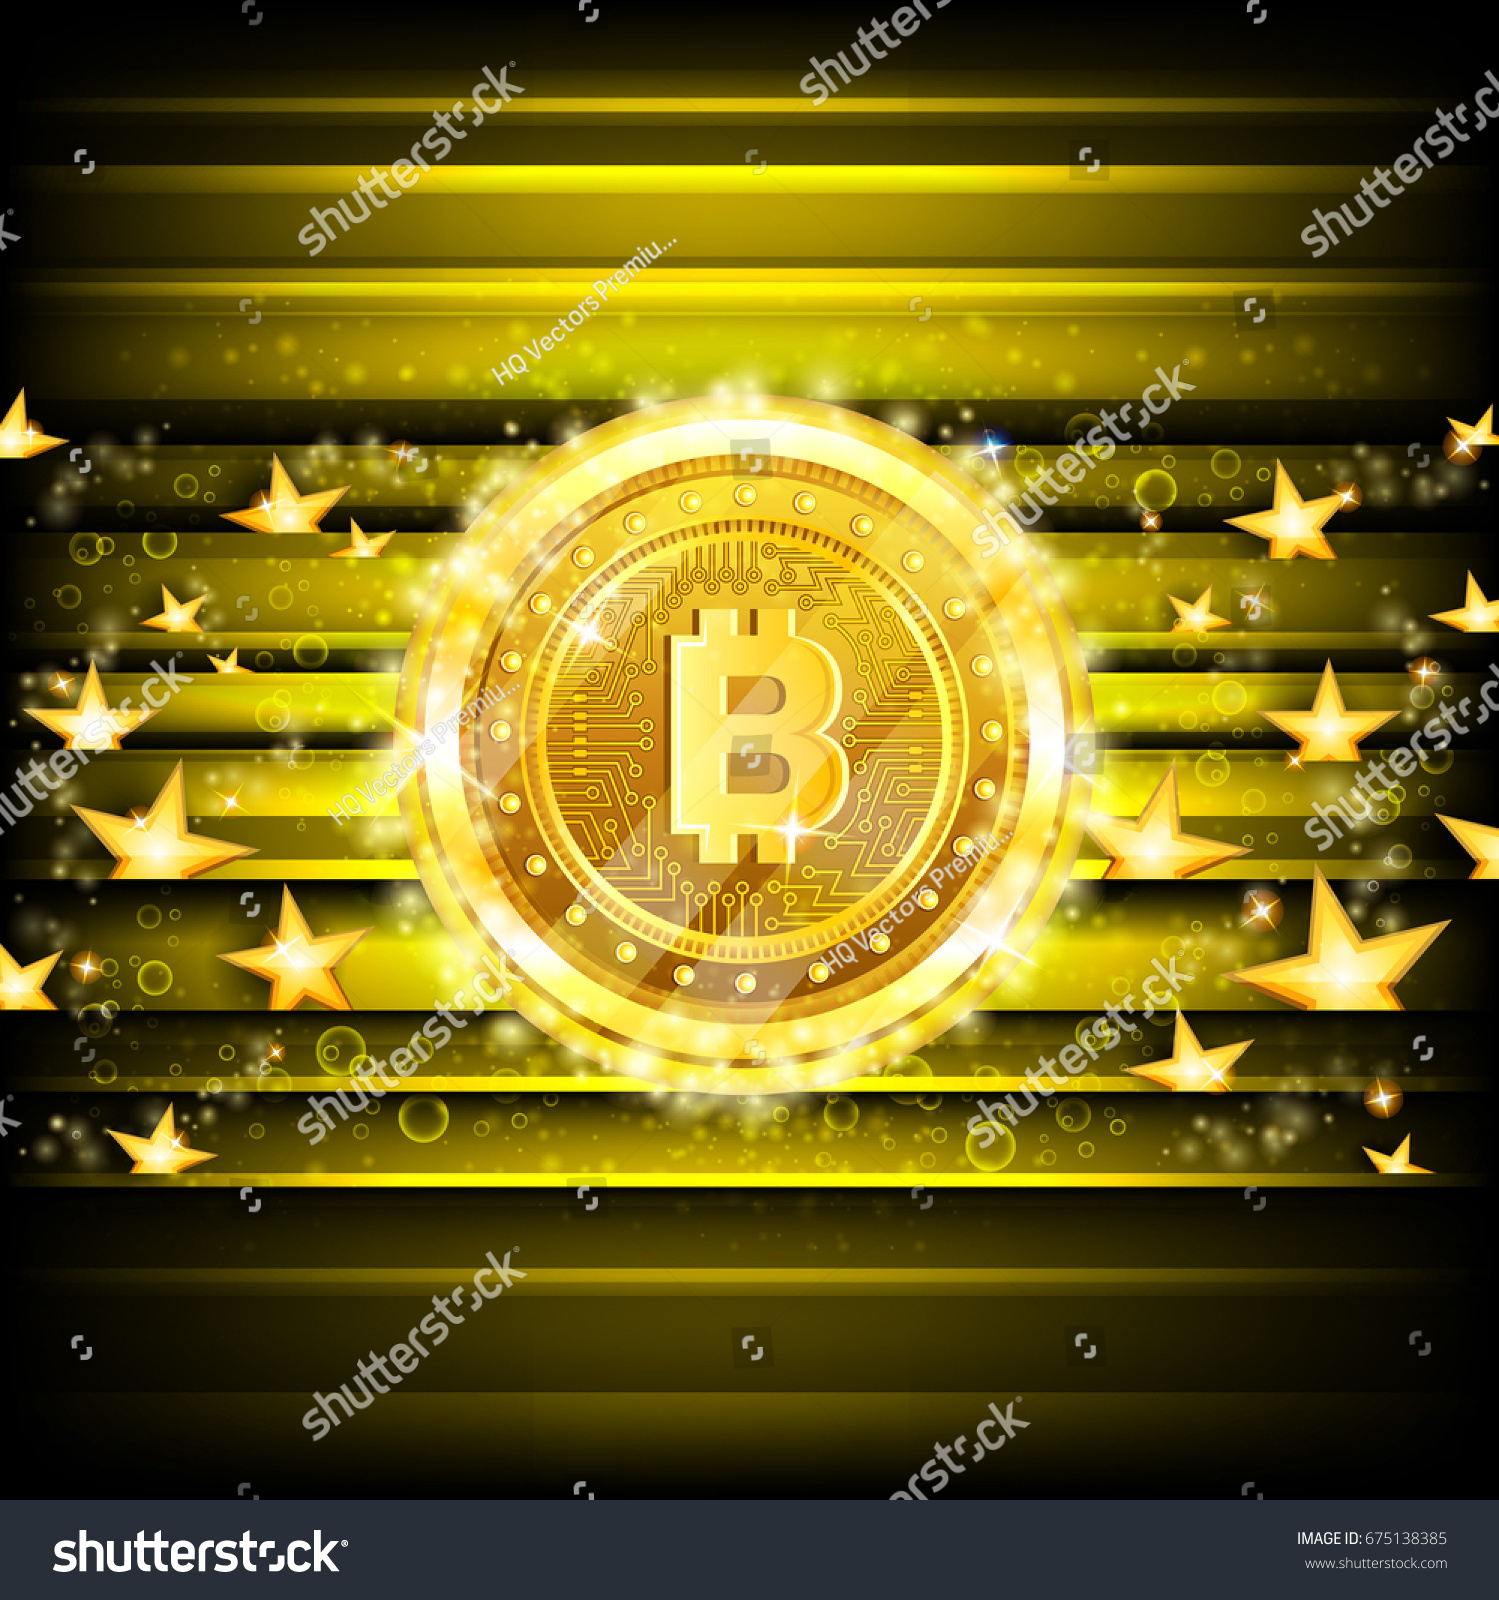 SVG of Golden bit coins and stars on yellow glossy background svg